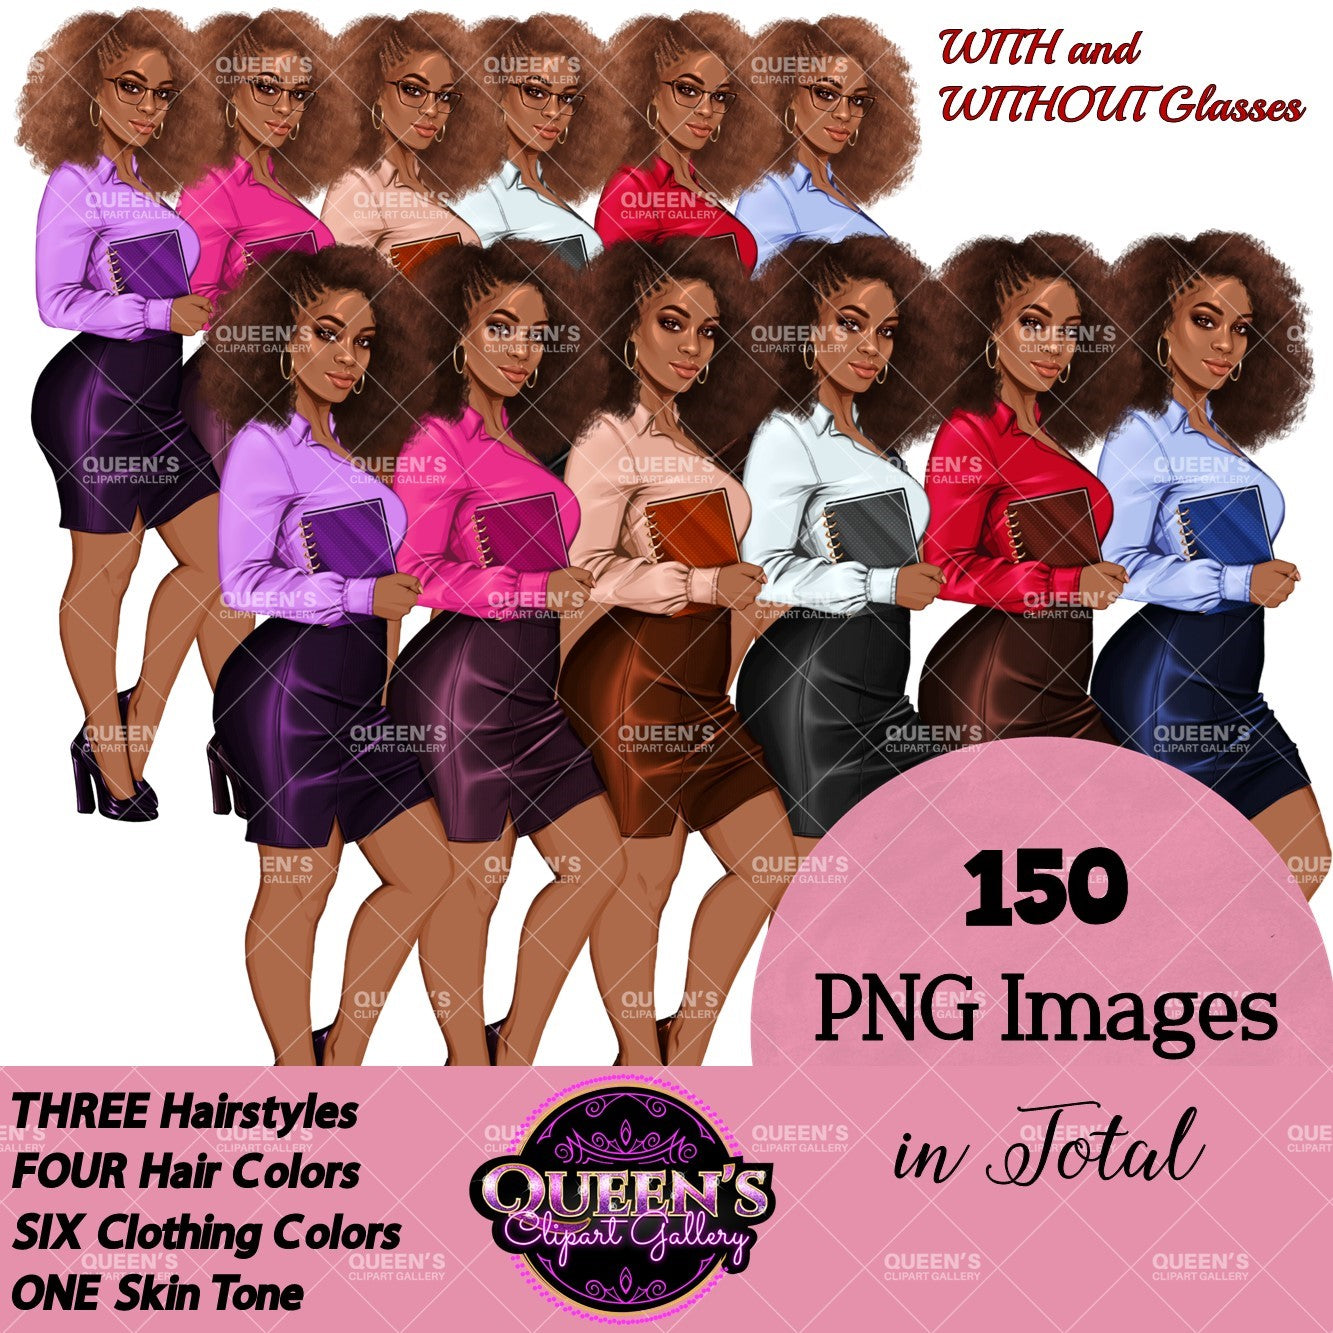 Business planner clipart, Lady boss clipart, Afro girl clipart, Fashion girl clipart, Teacher clipart, Black girl magic, Business woman